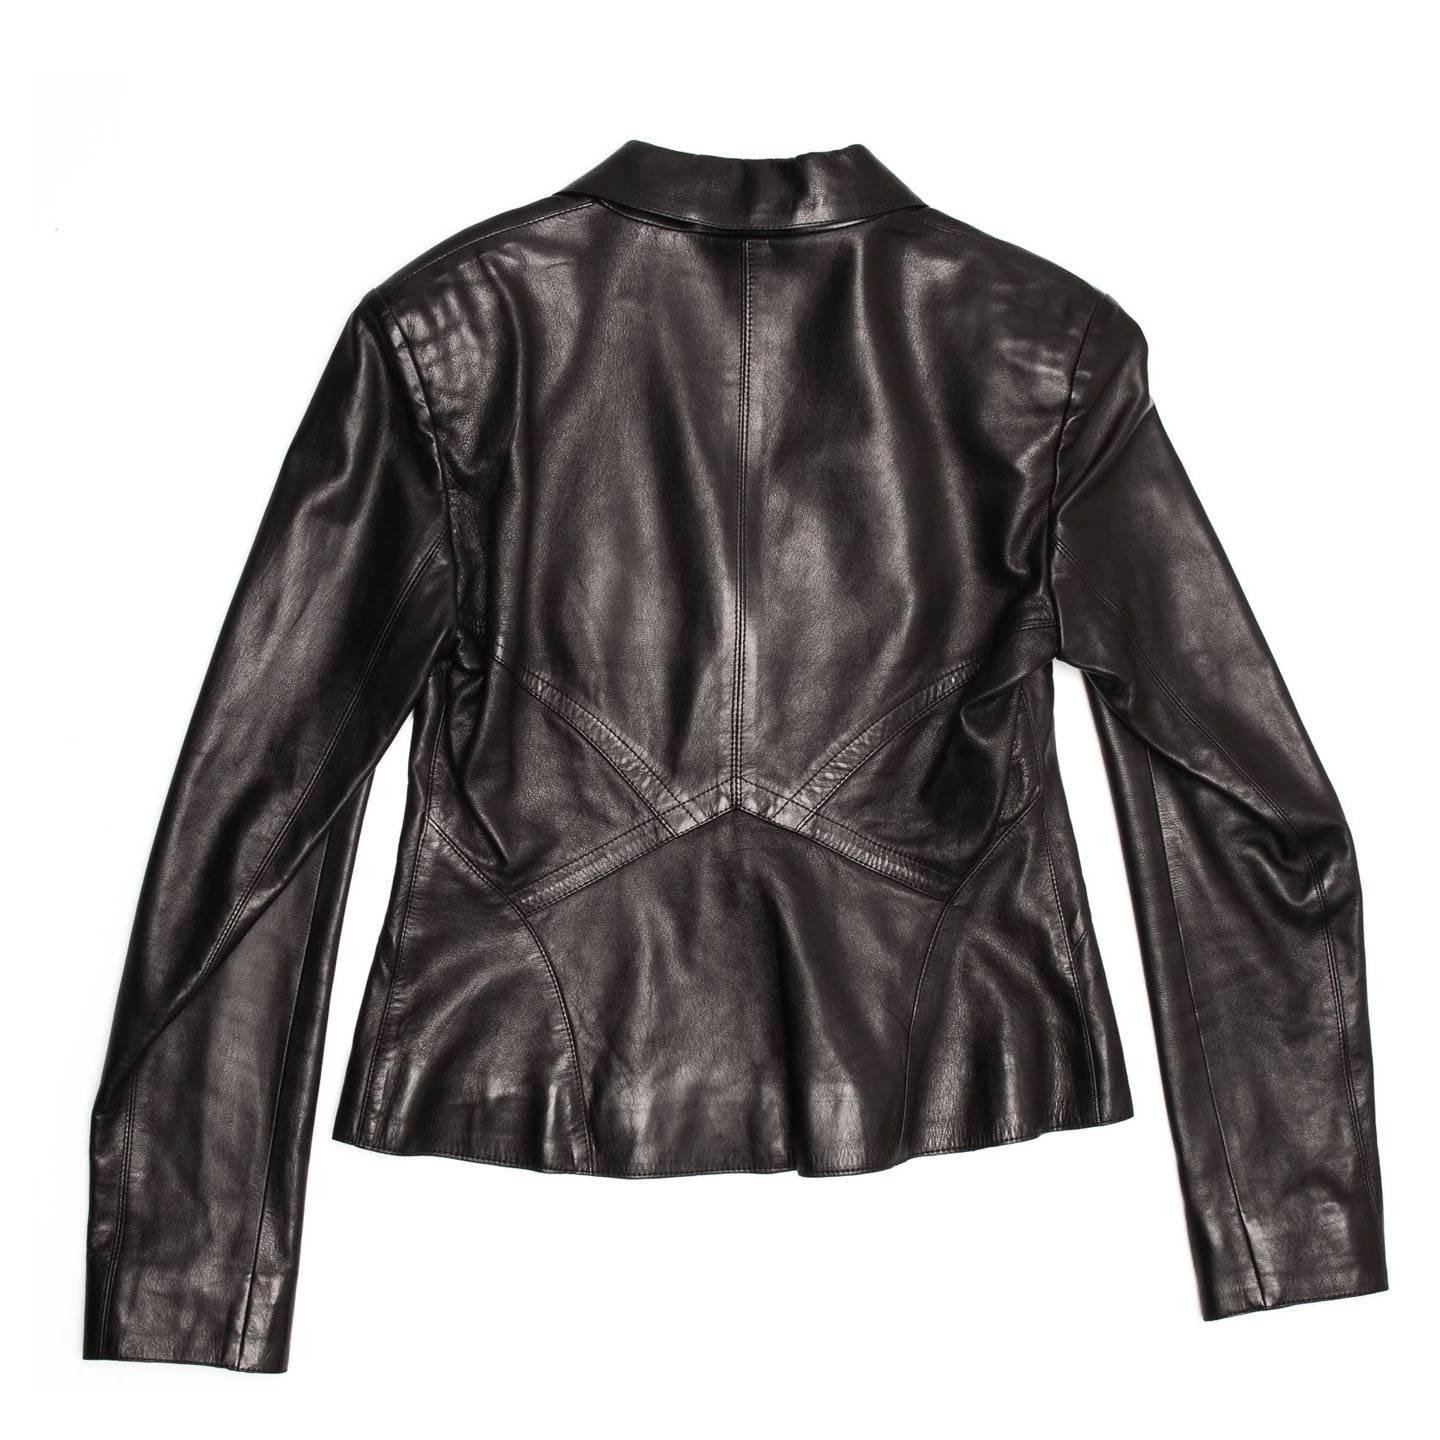 Prada Black Nappa Leather Jacket In Excellent Condition For Sale In Brooklyn, NY